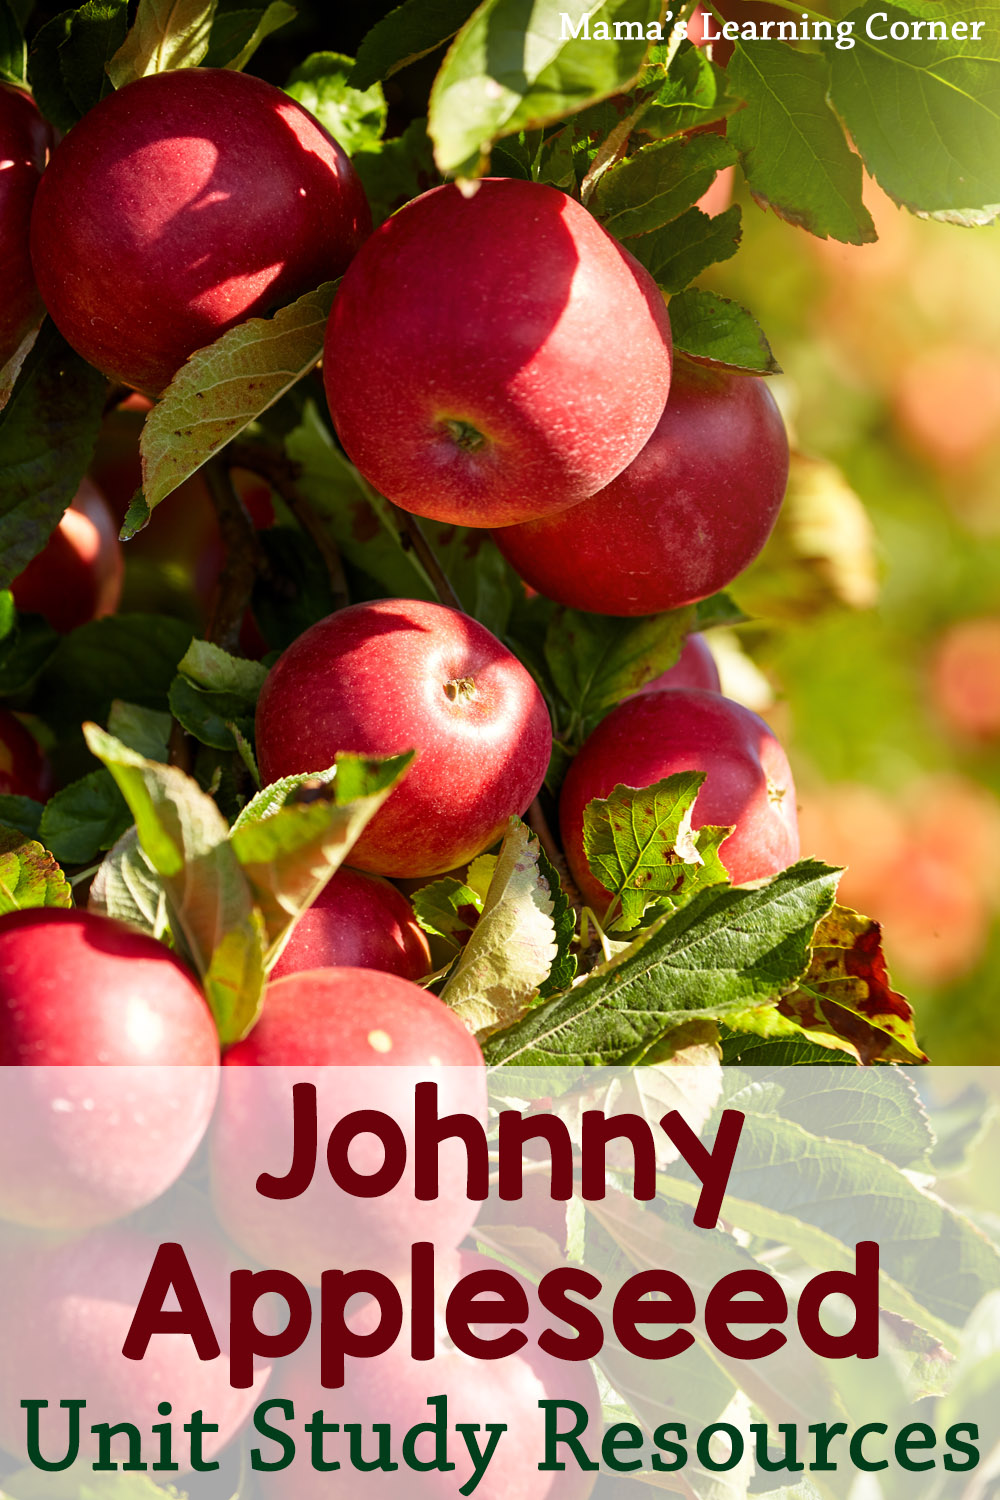 johnny-appleseed-worksheets-and-unit-study-resources-mamas-learning-corner